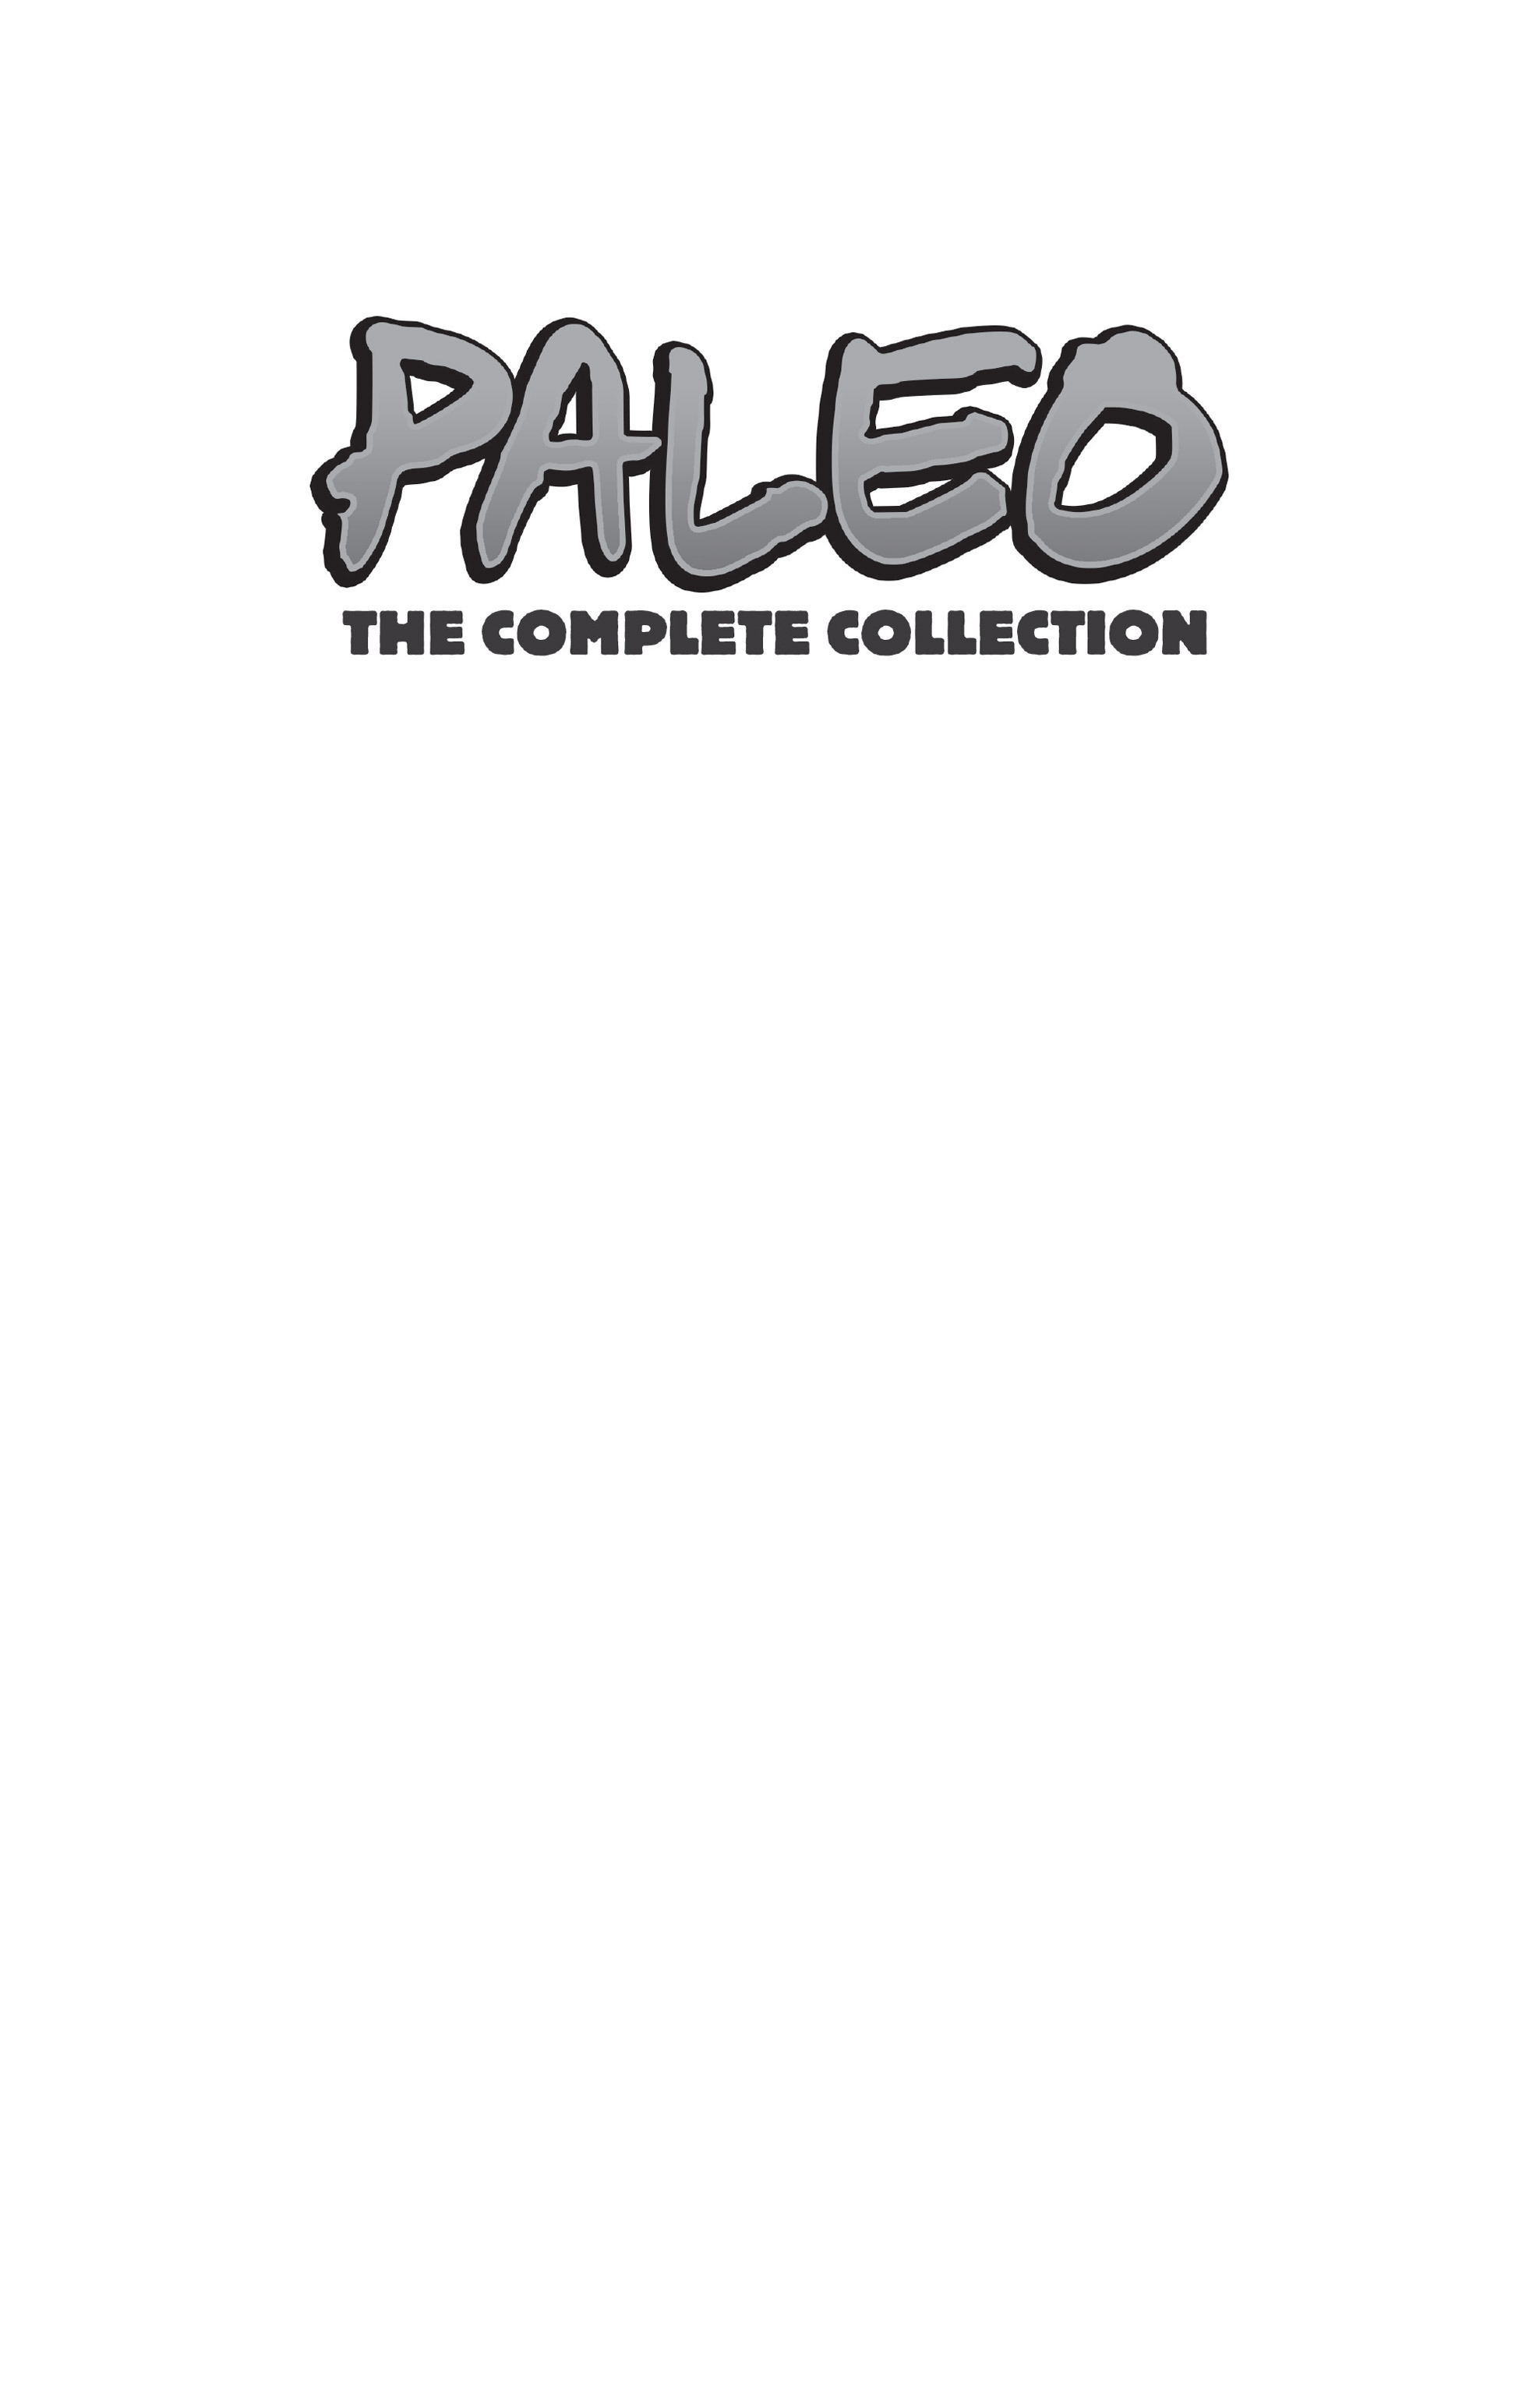 Read online Paleo: The Complete Collection comic -  Issue # TPB (Part 1) - 2